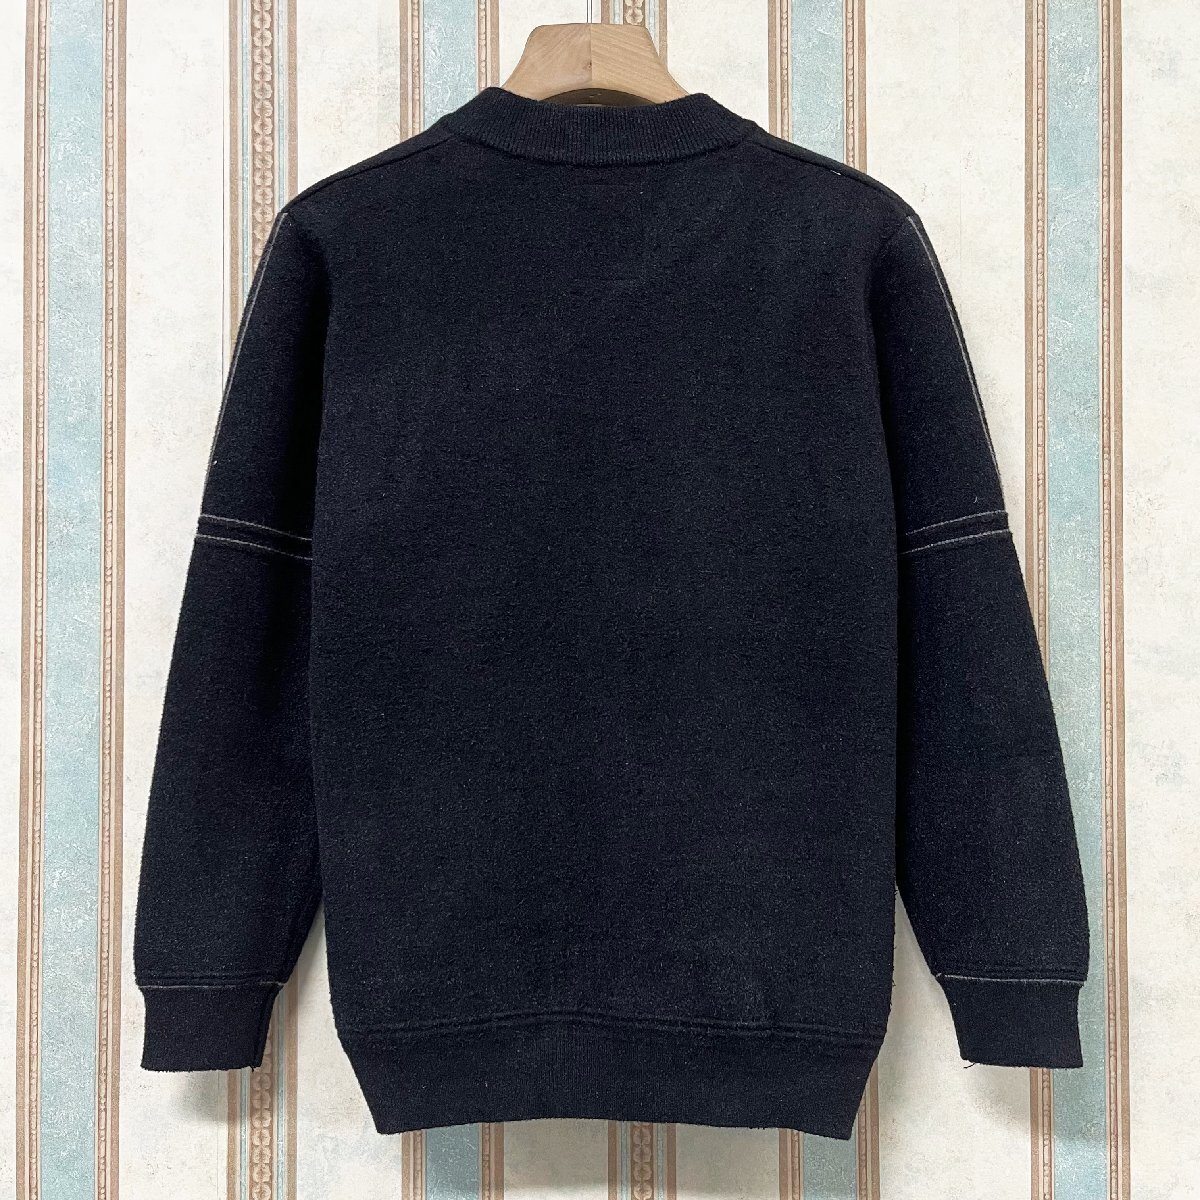  standard regular price 6 ten thousand FRANKLIN MUSK* America * New York departure blouson knitted gorgeous cashmere / mink . plain cardigan simple man and woman use 2